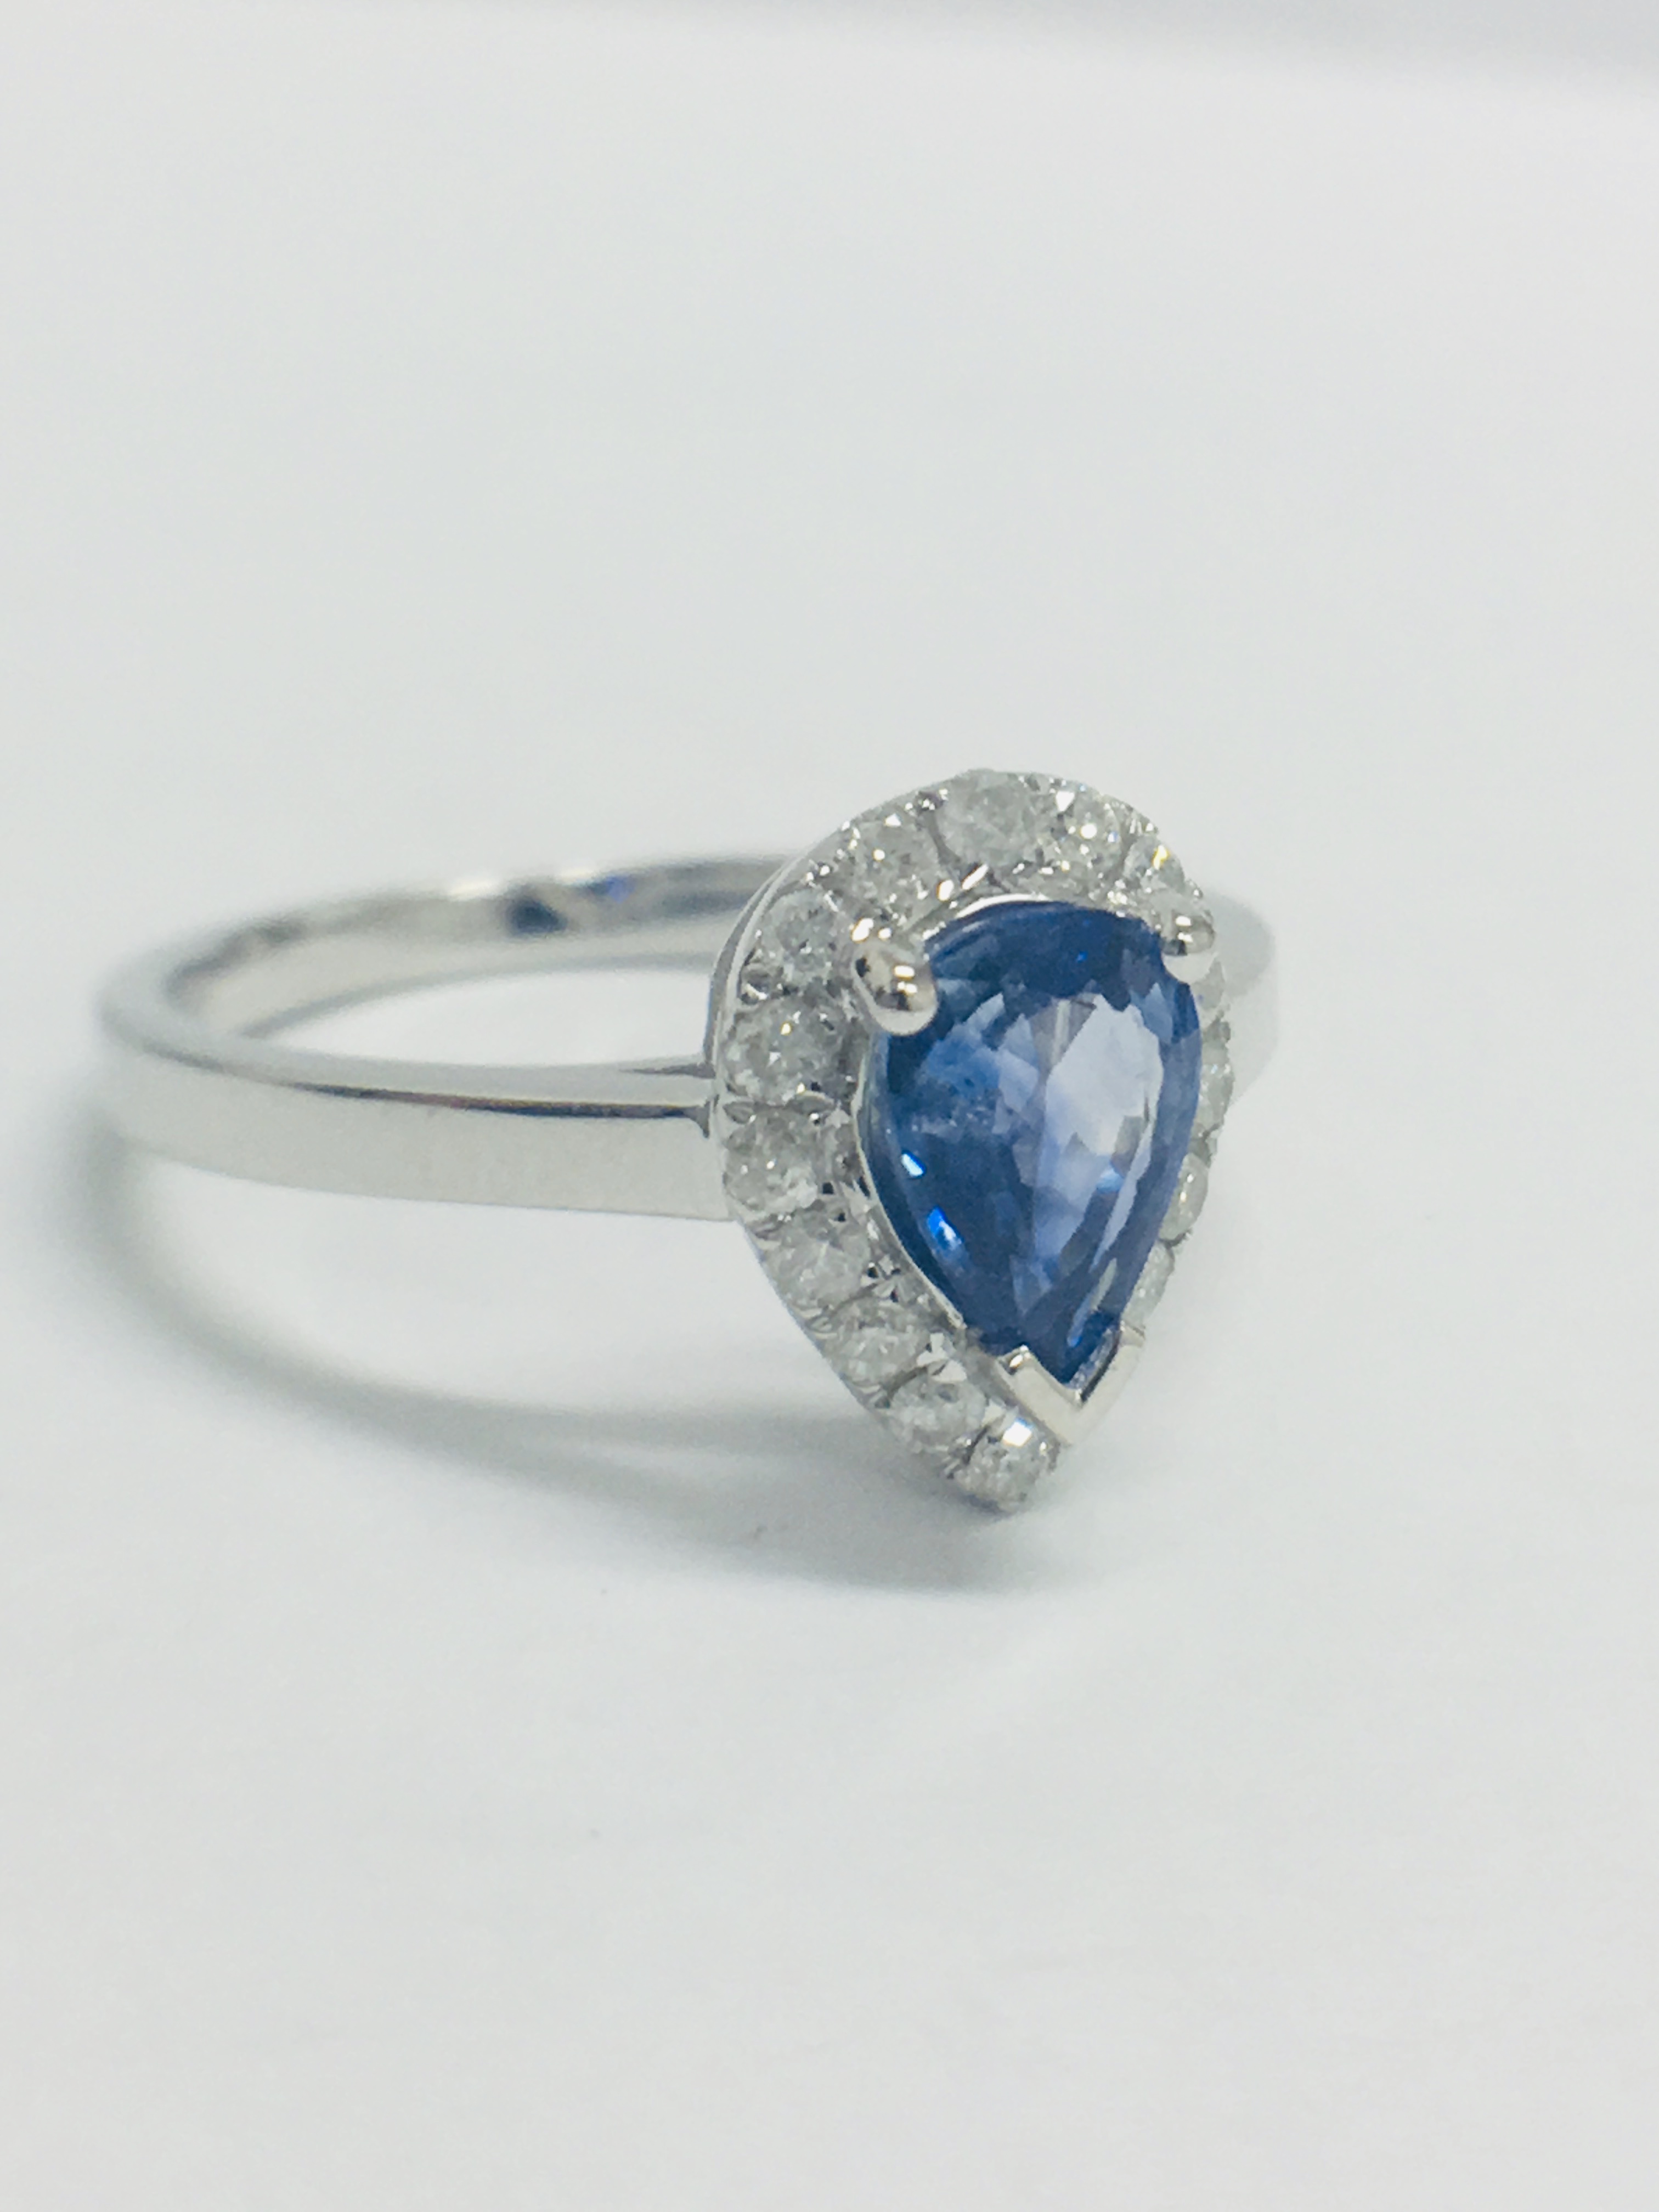 14Ct White Gold Sapphire And Diamond Ring. - Image 7 of 10